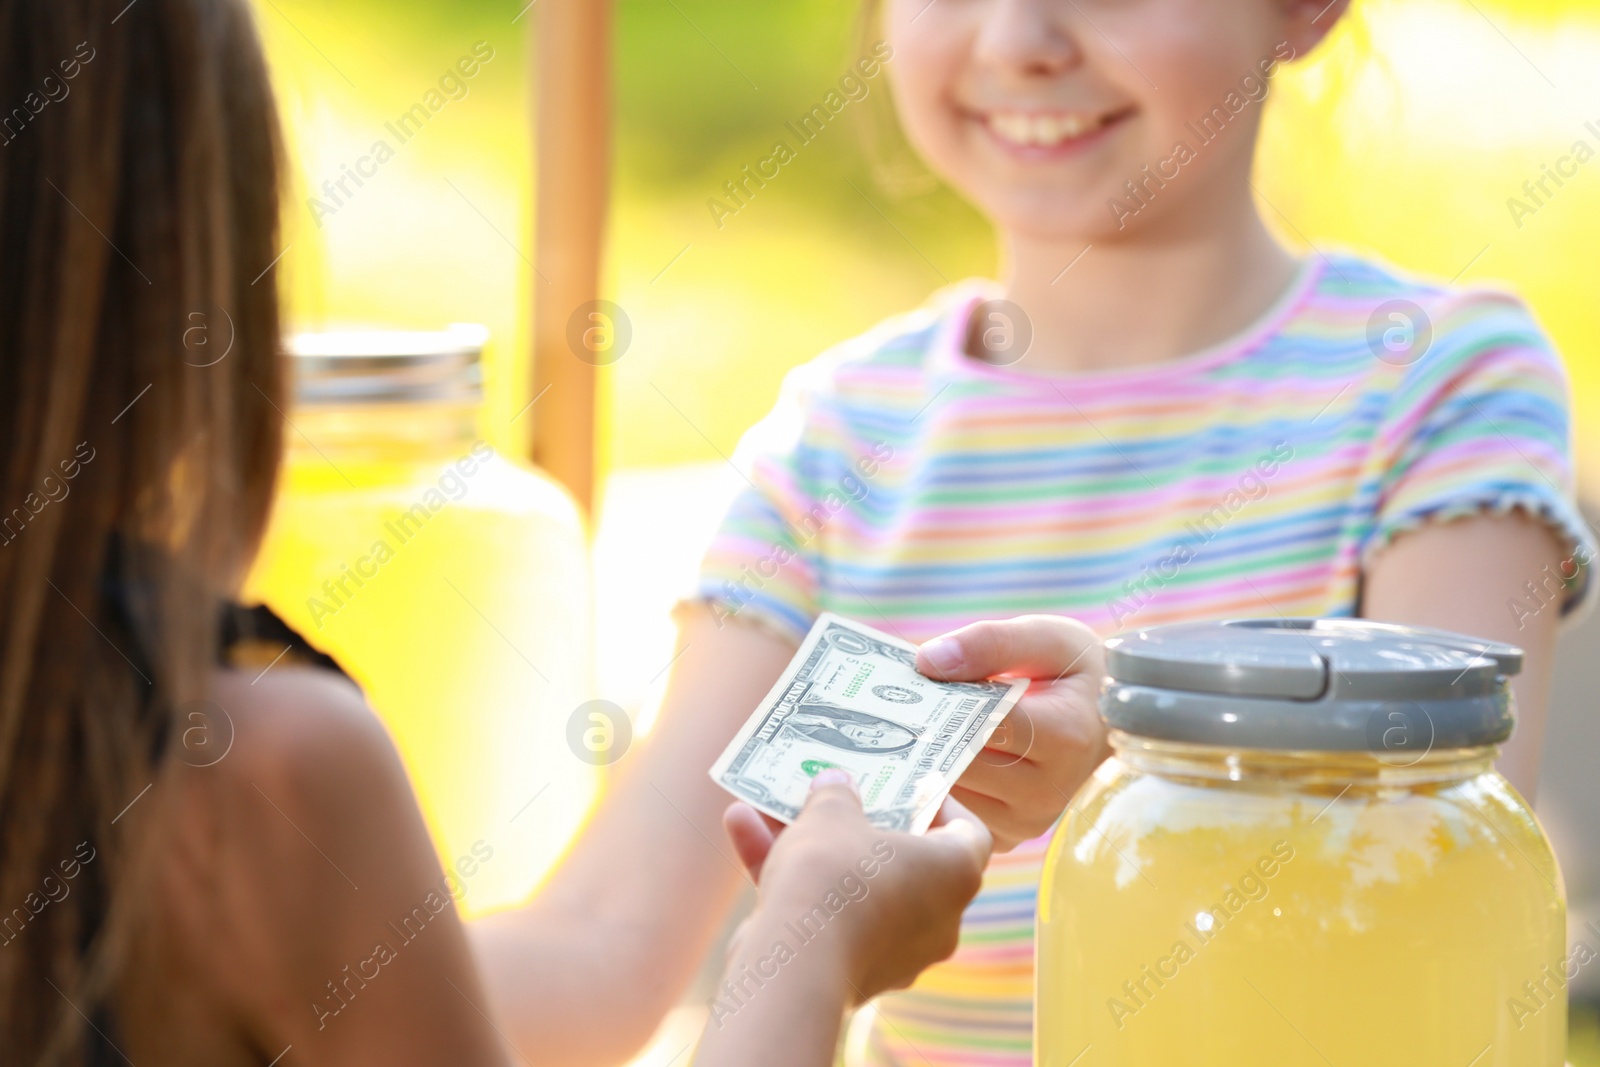 Photo of Little girl selling natural lemonade to kid in park, closeup. Summer refreshing drink